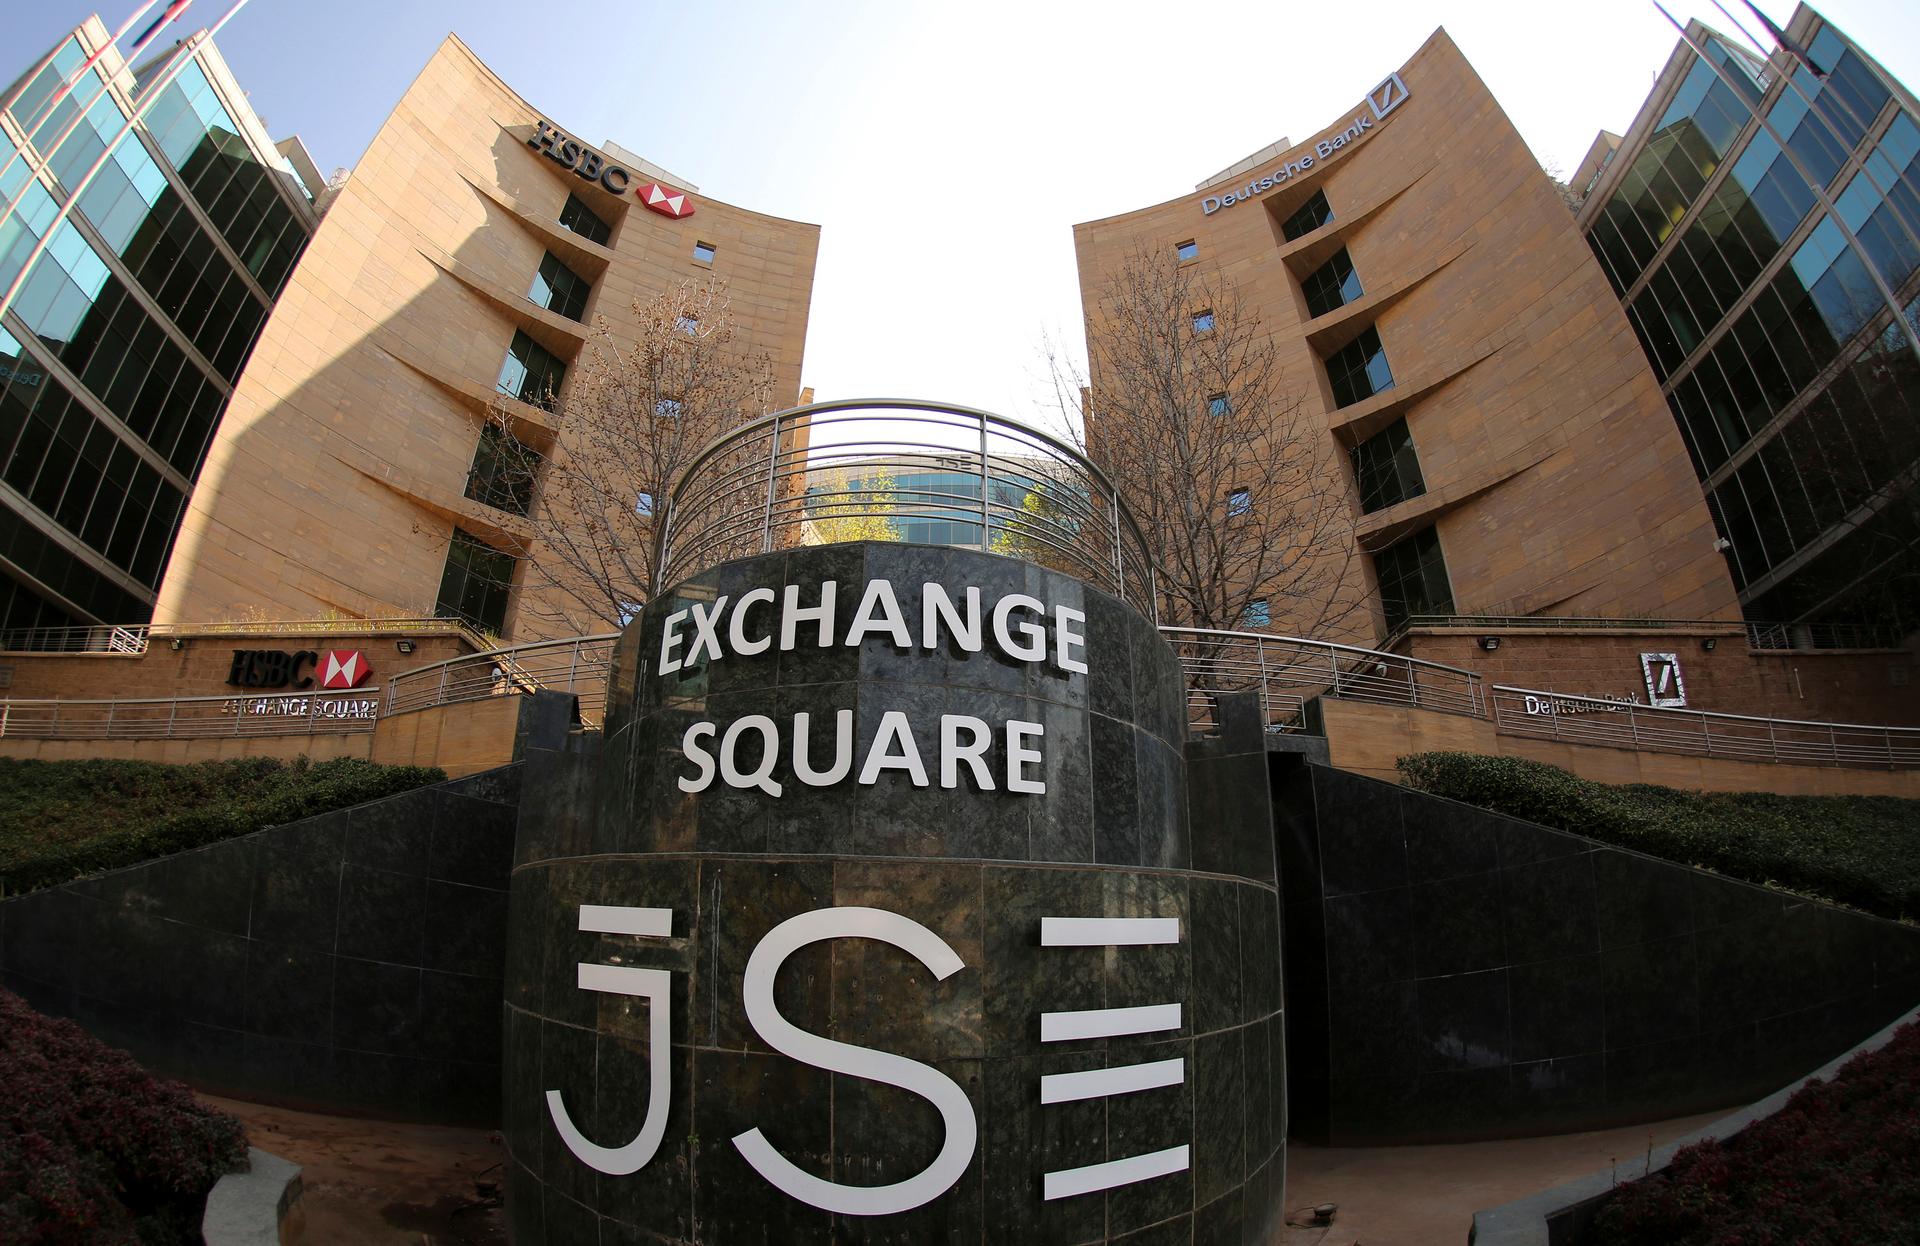 A view of the Johannesburg Stock Exchange building